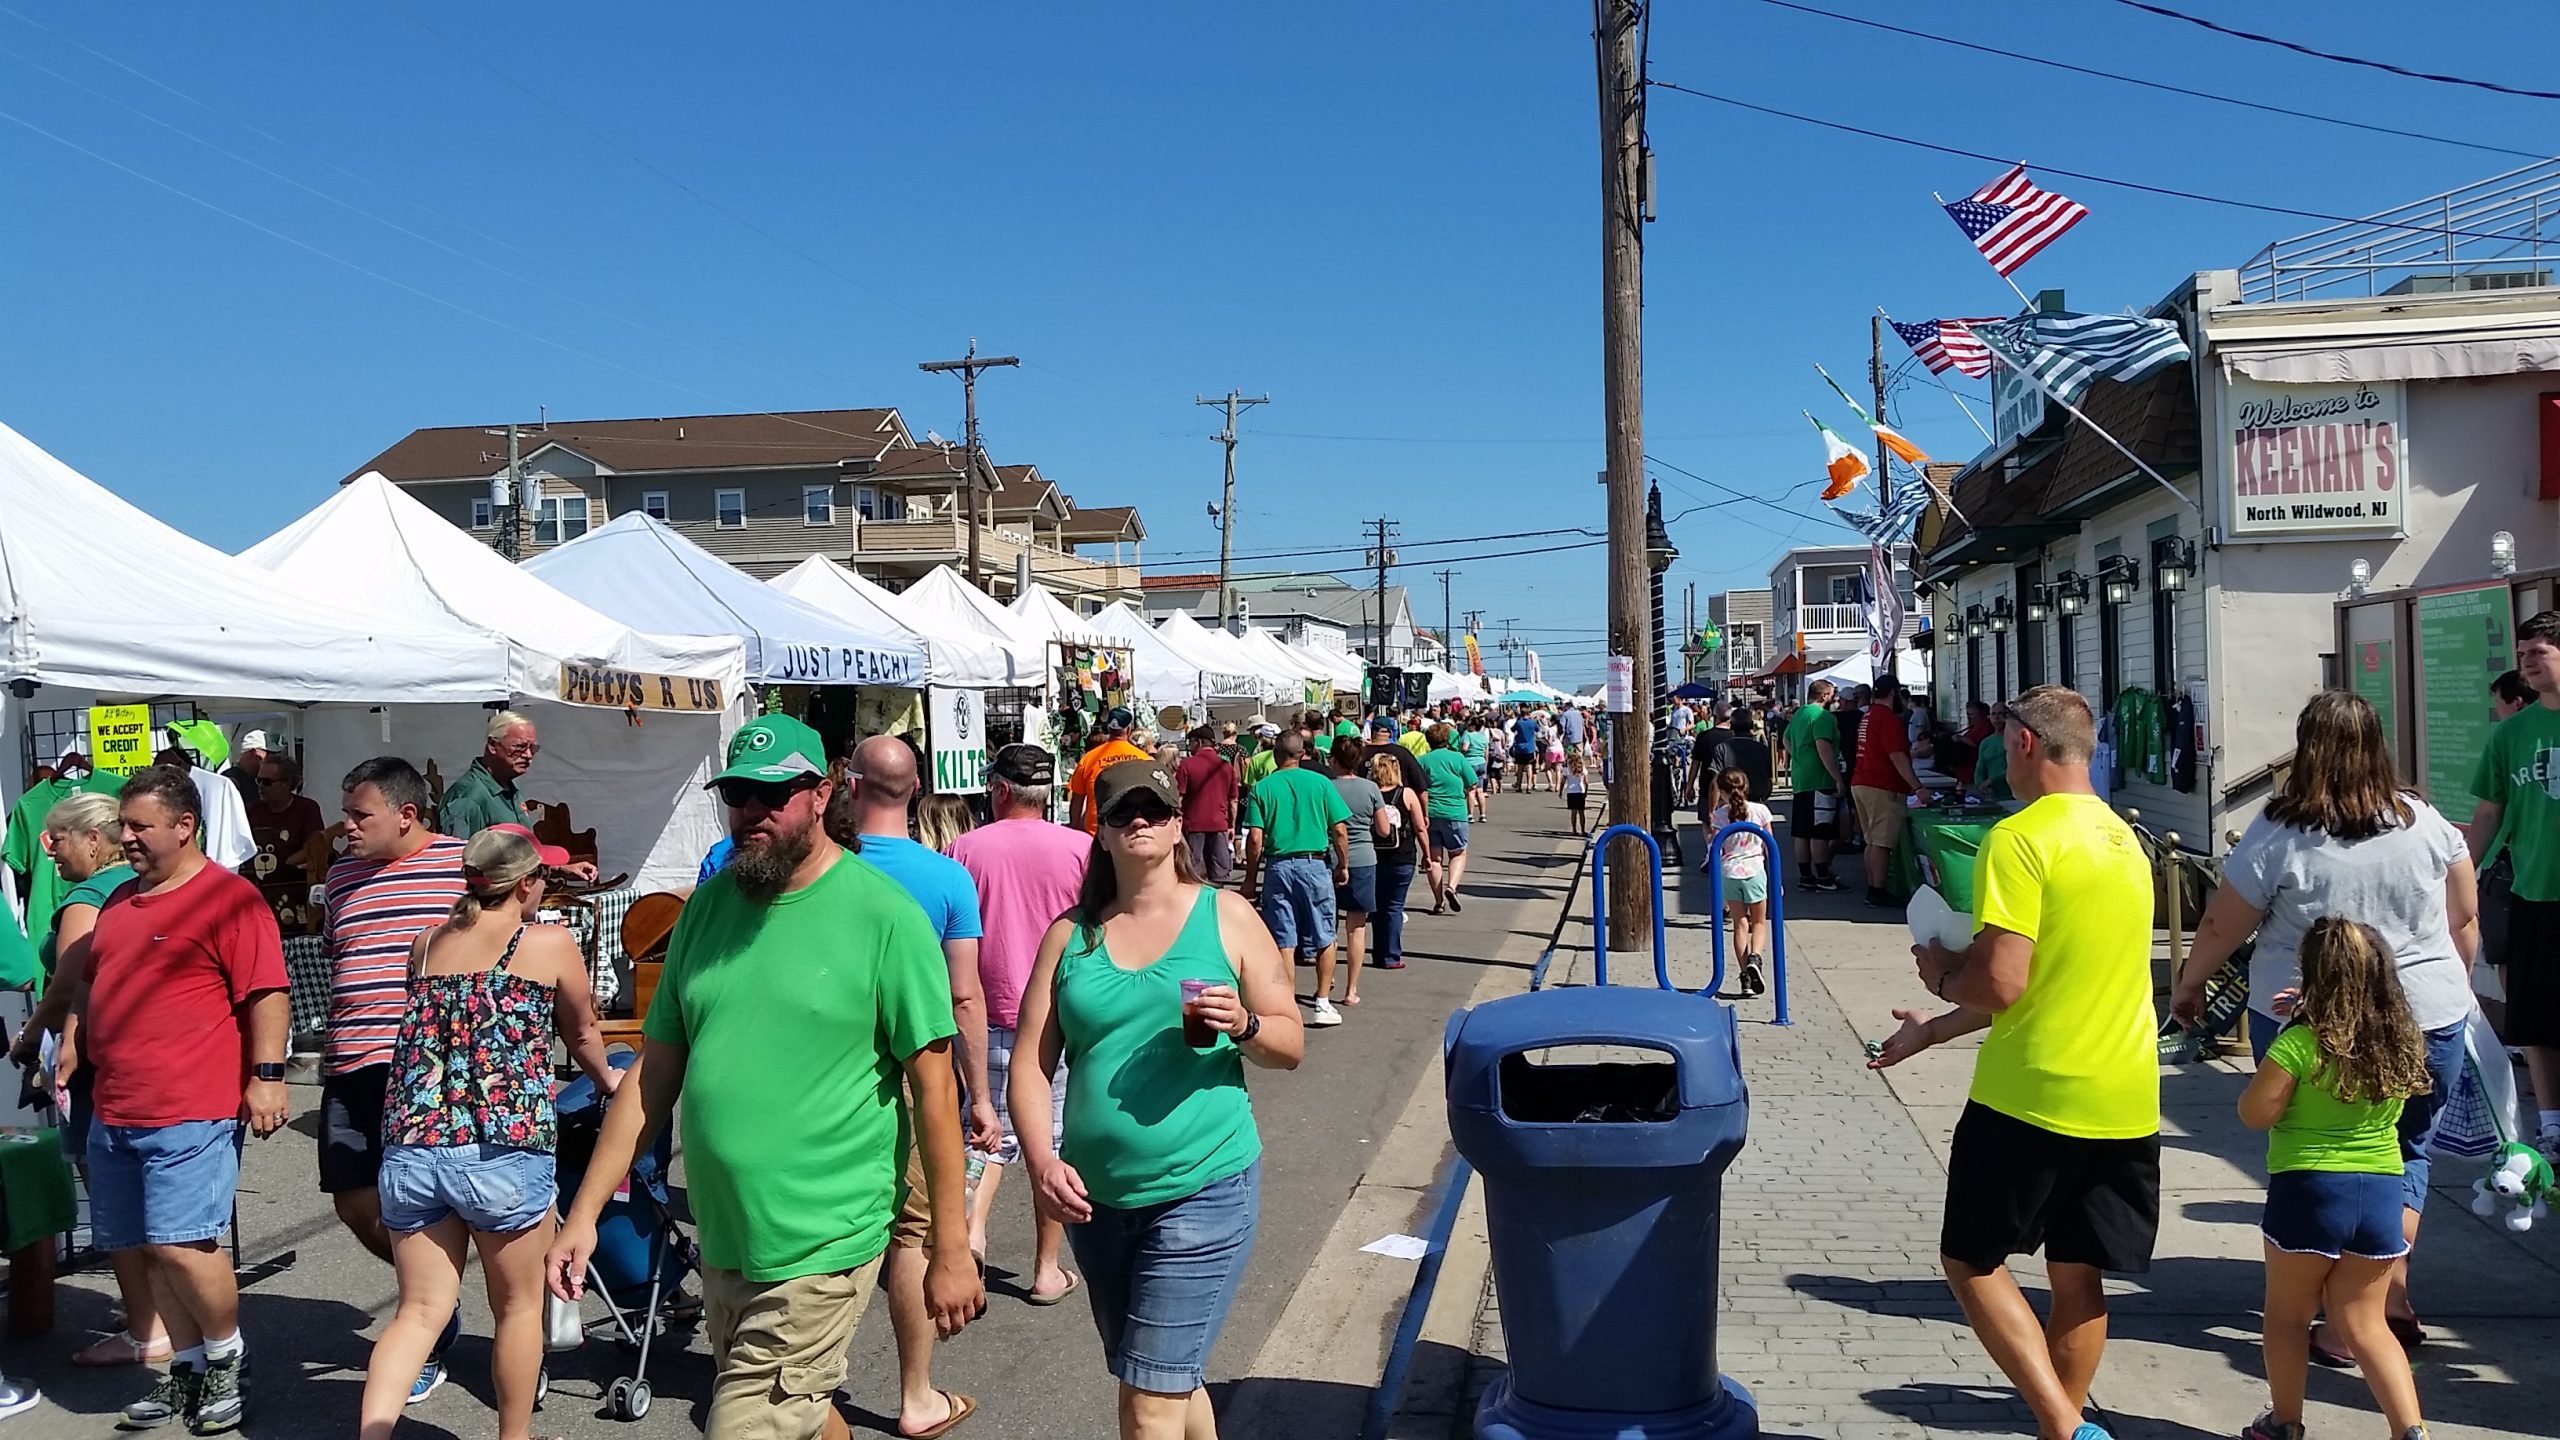 North Wildwood Irish Fall Festival is on for 2021. September 24, 25, 26